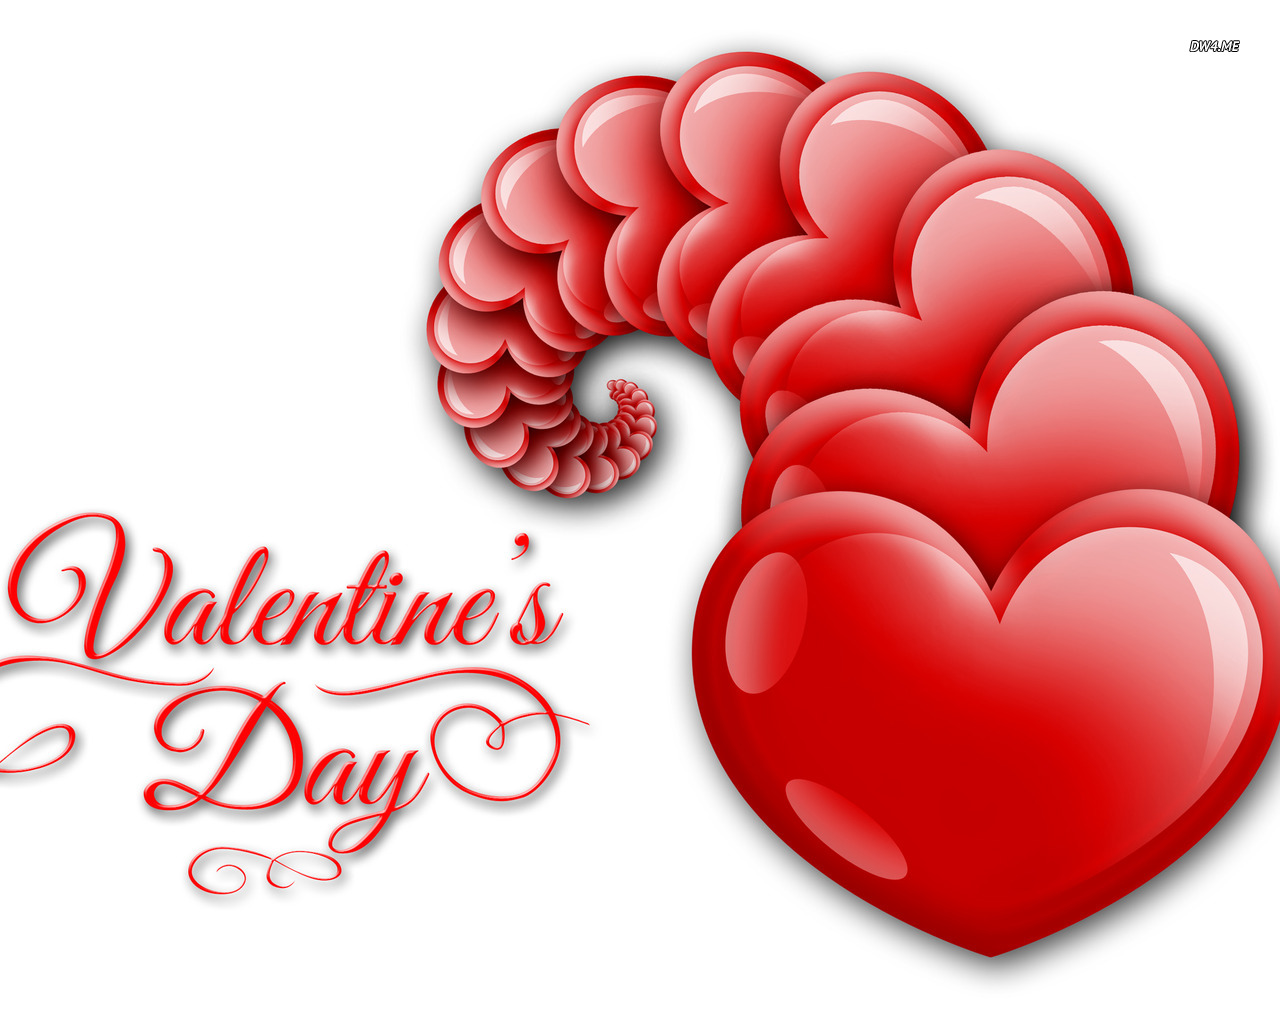 Valentines Day wallpaper   Holiday wallpapers   2111